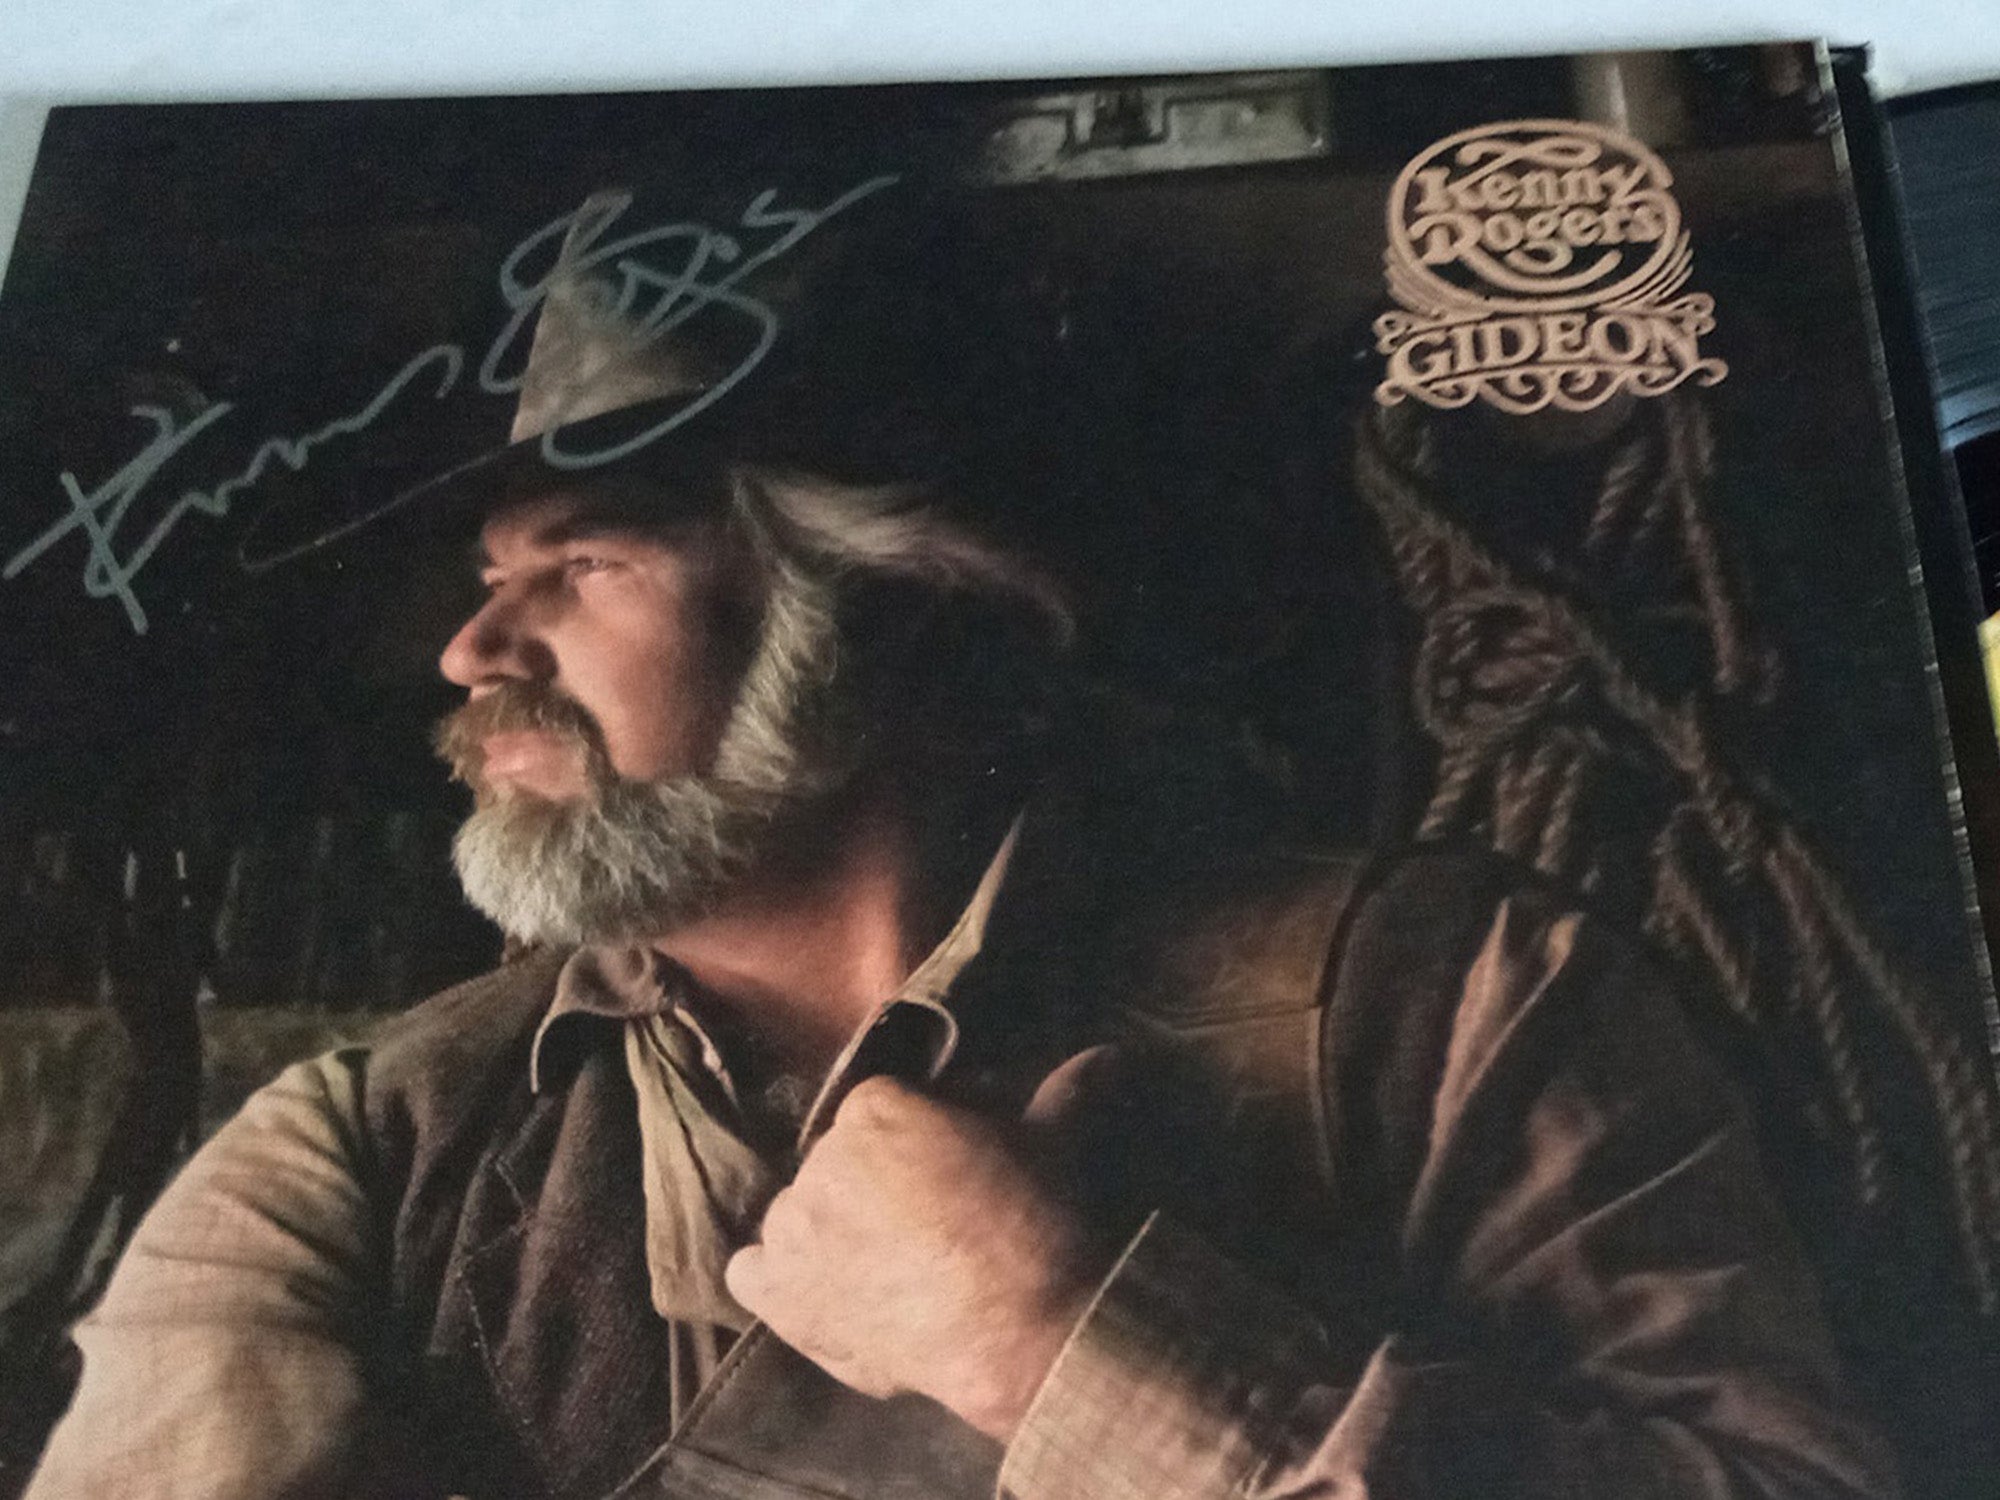 Kenny Rogers Gideon LP signed with proof